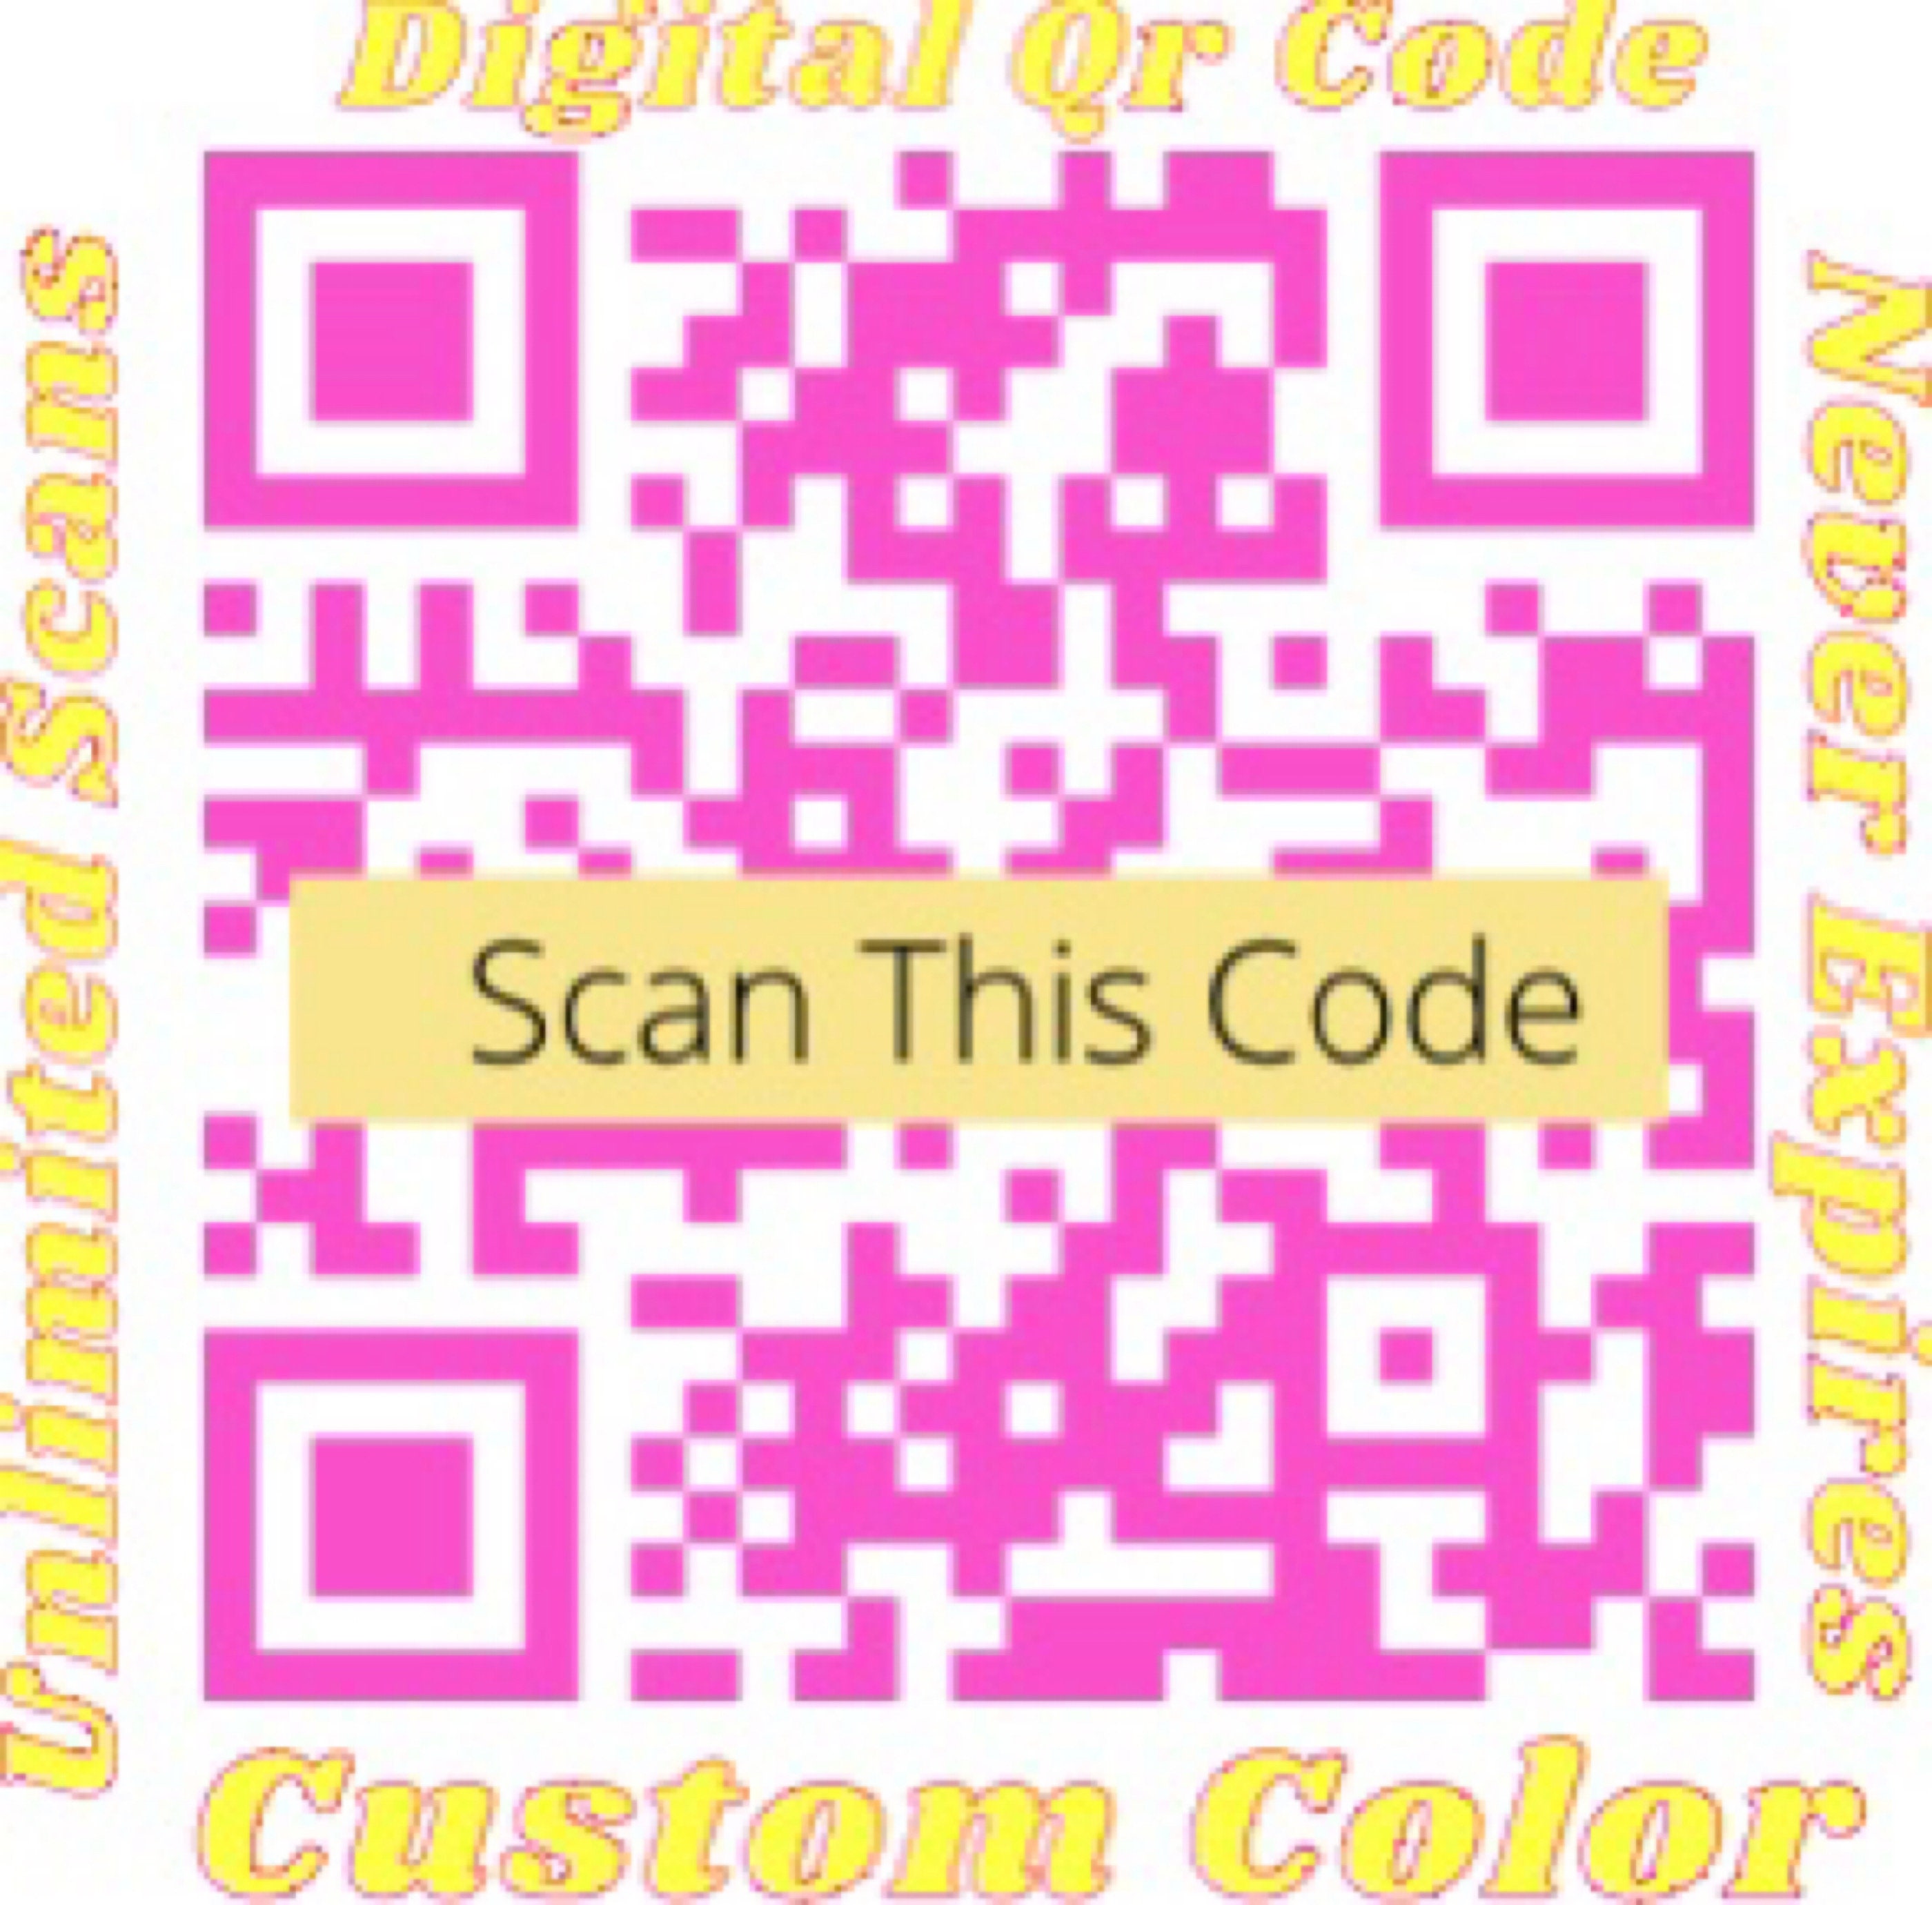 Qr Qr Pay to Baby - Scan Business Shower Qr Cards, Custom Codes for Registry, Etsy Digital Qr Codes Signs Code Weddings, Code Download